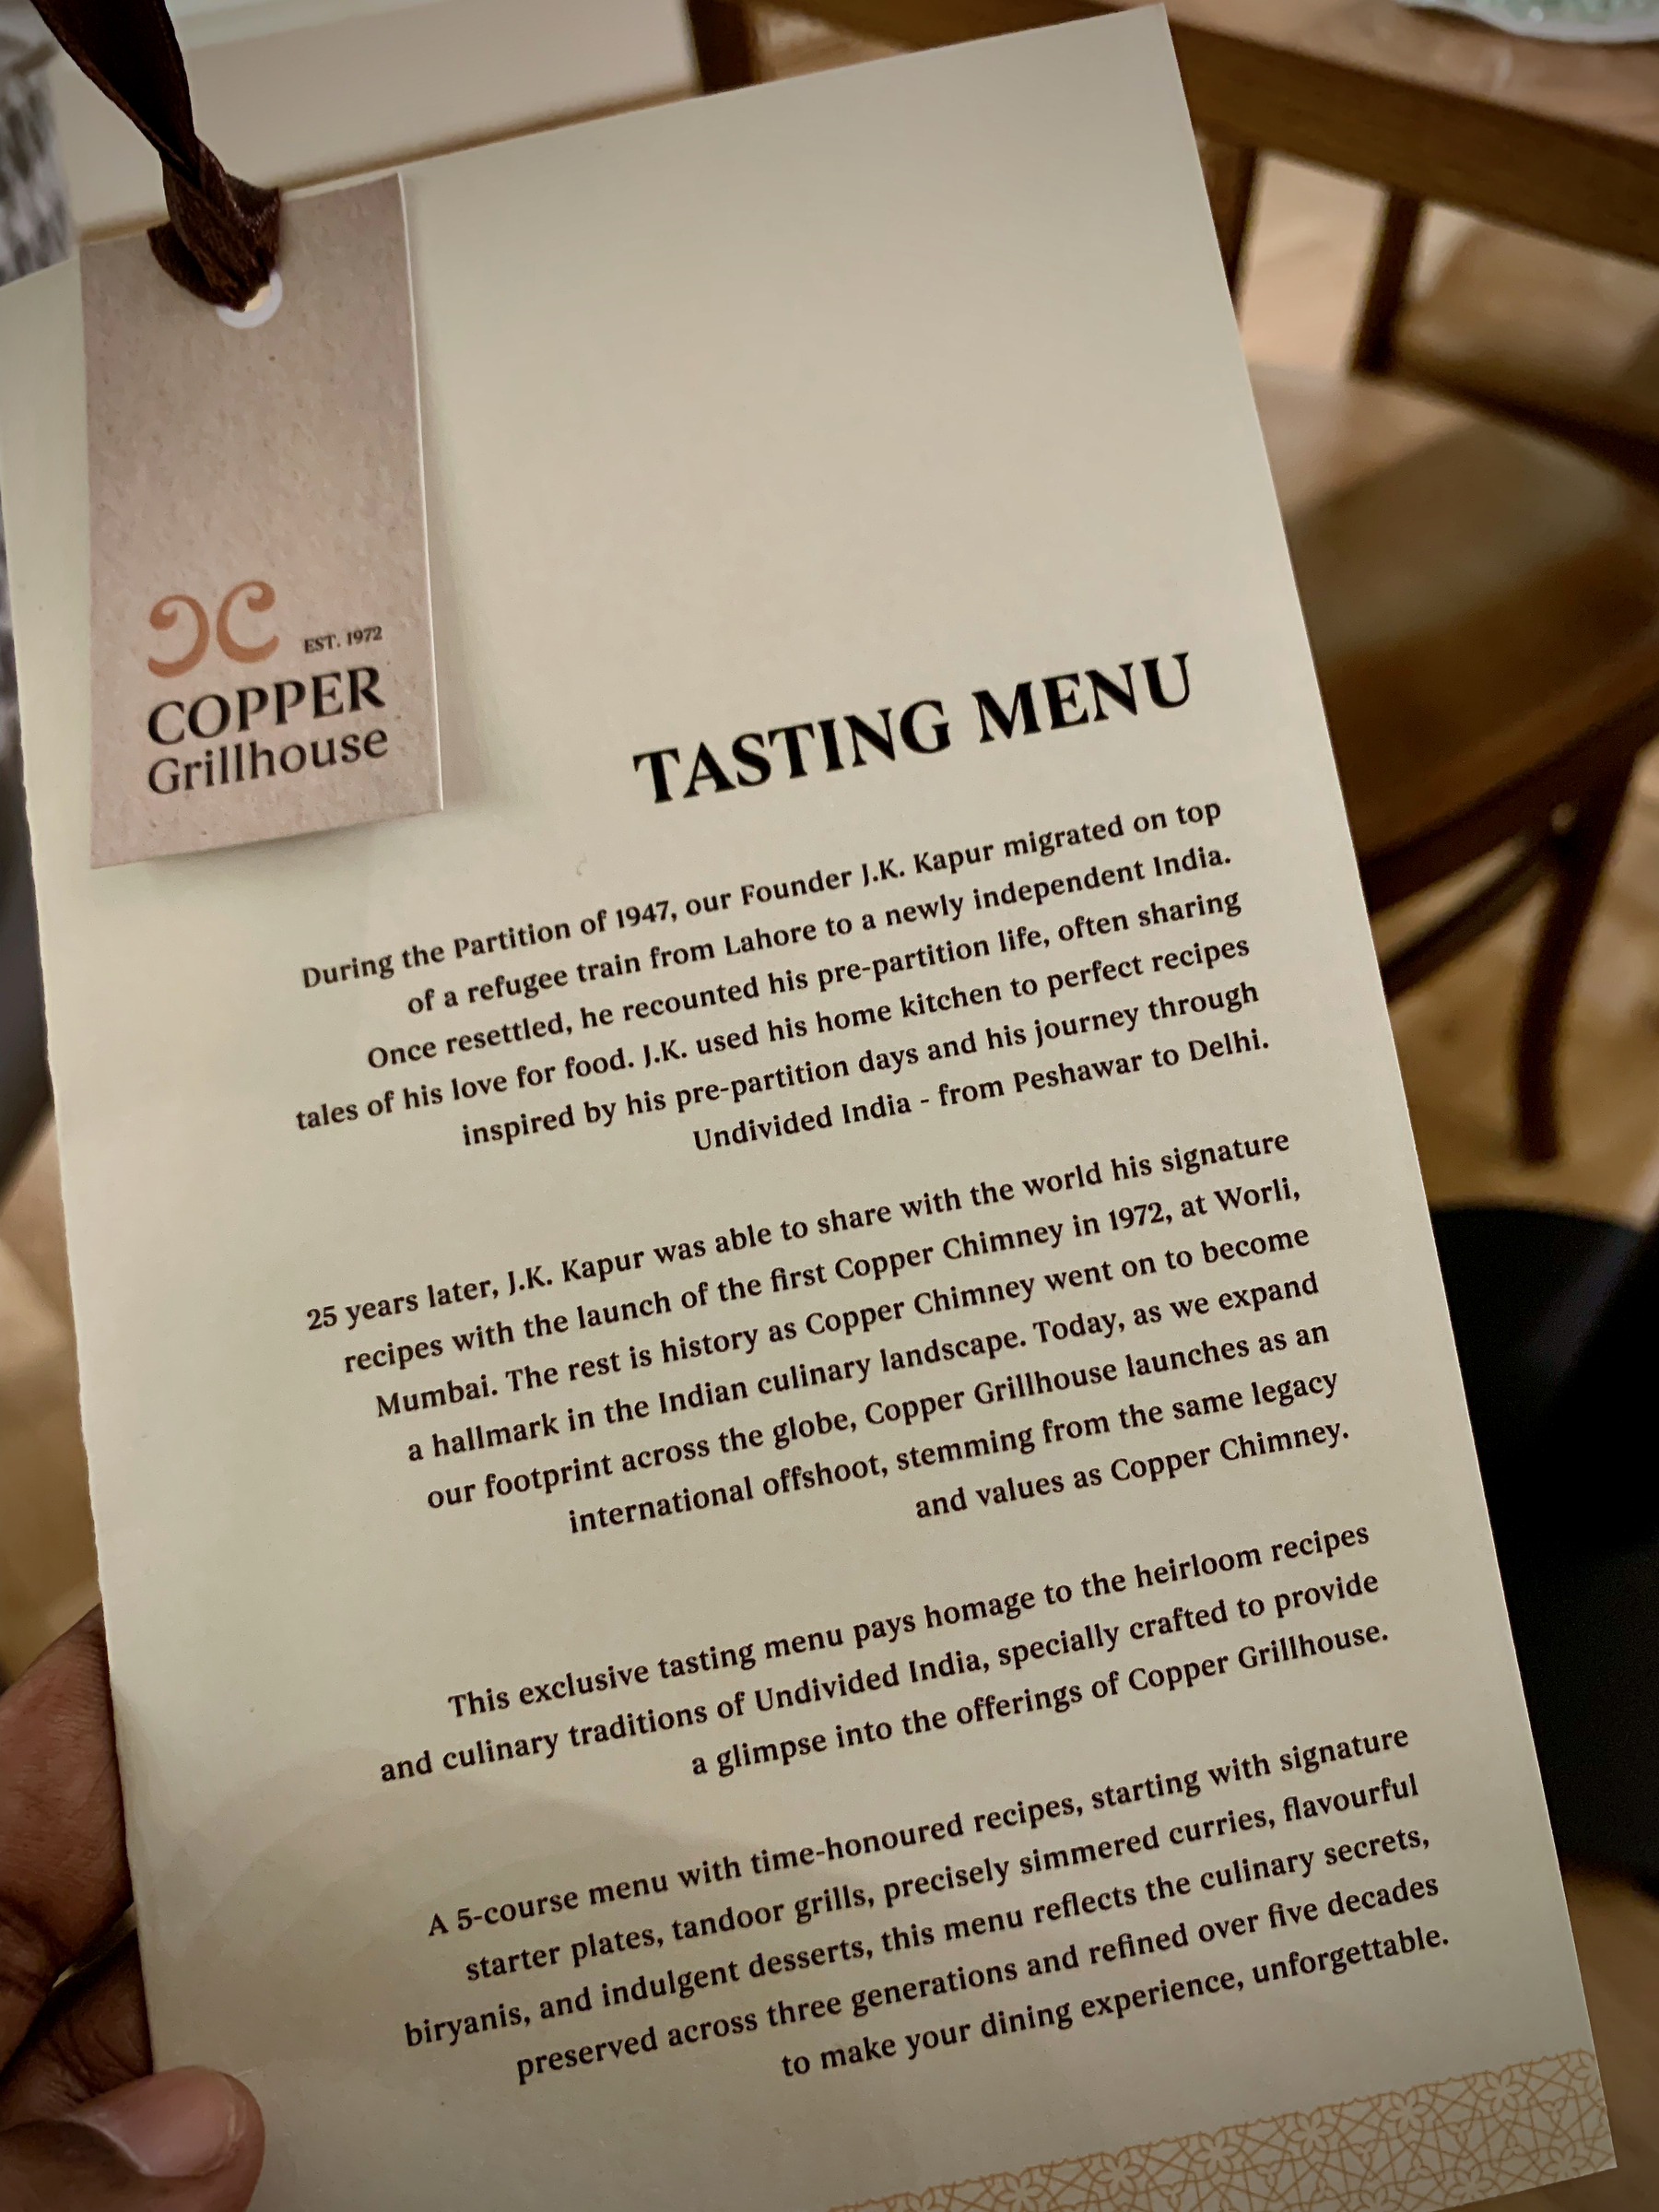 Photo of the first page of the tasting menu of Copper Grillhouse, which gives an overview of the history of the restaurant chain.